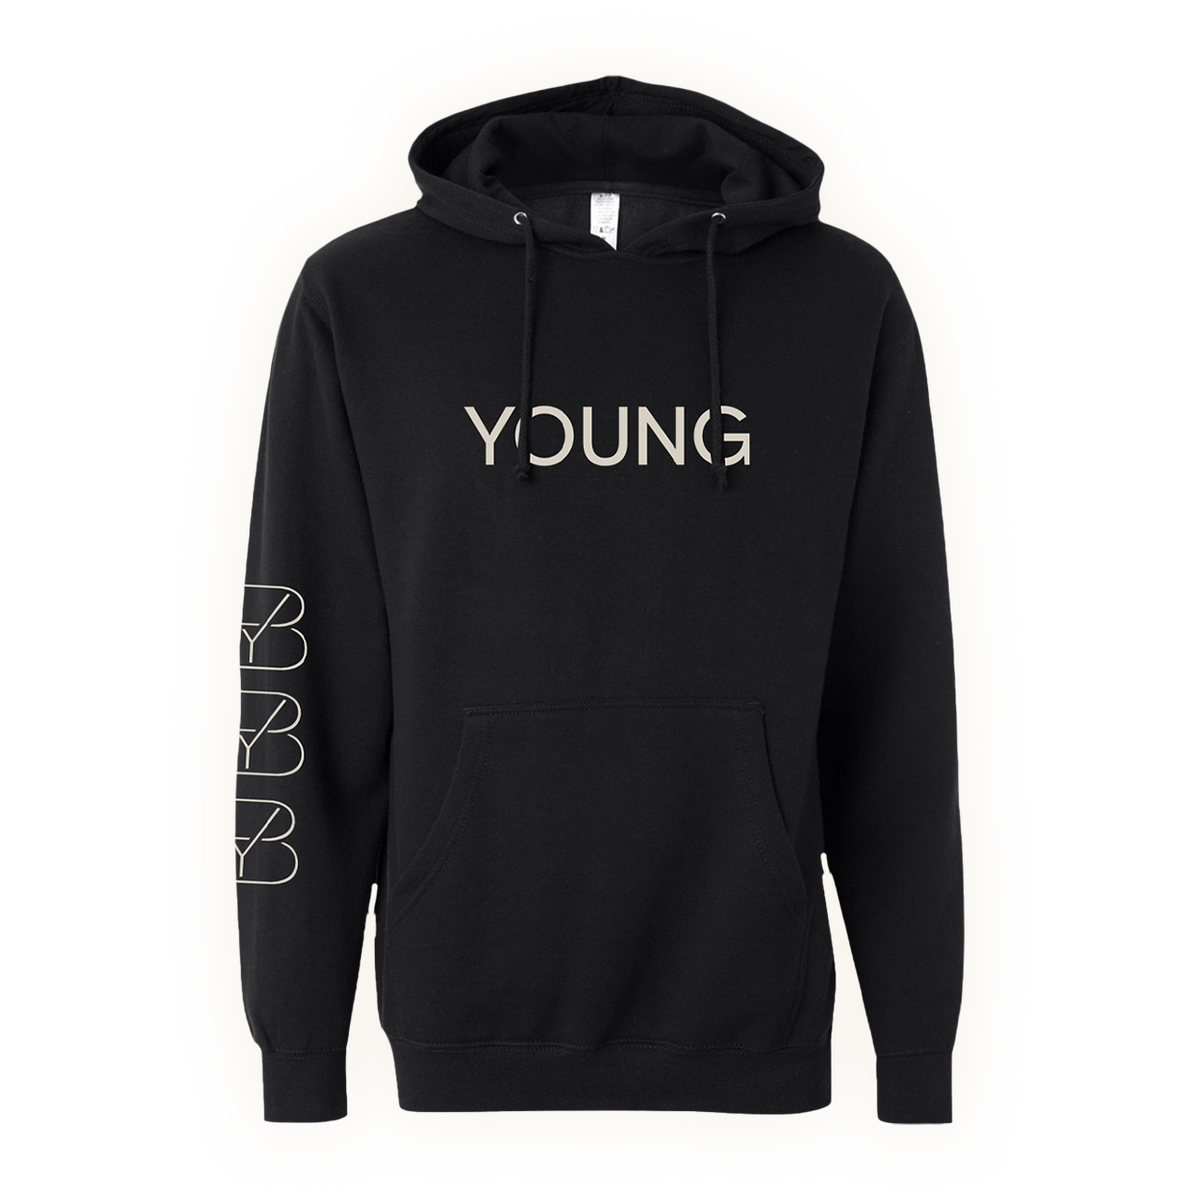 Young Hoodie